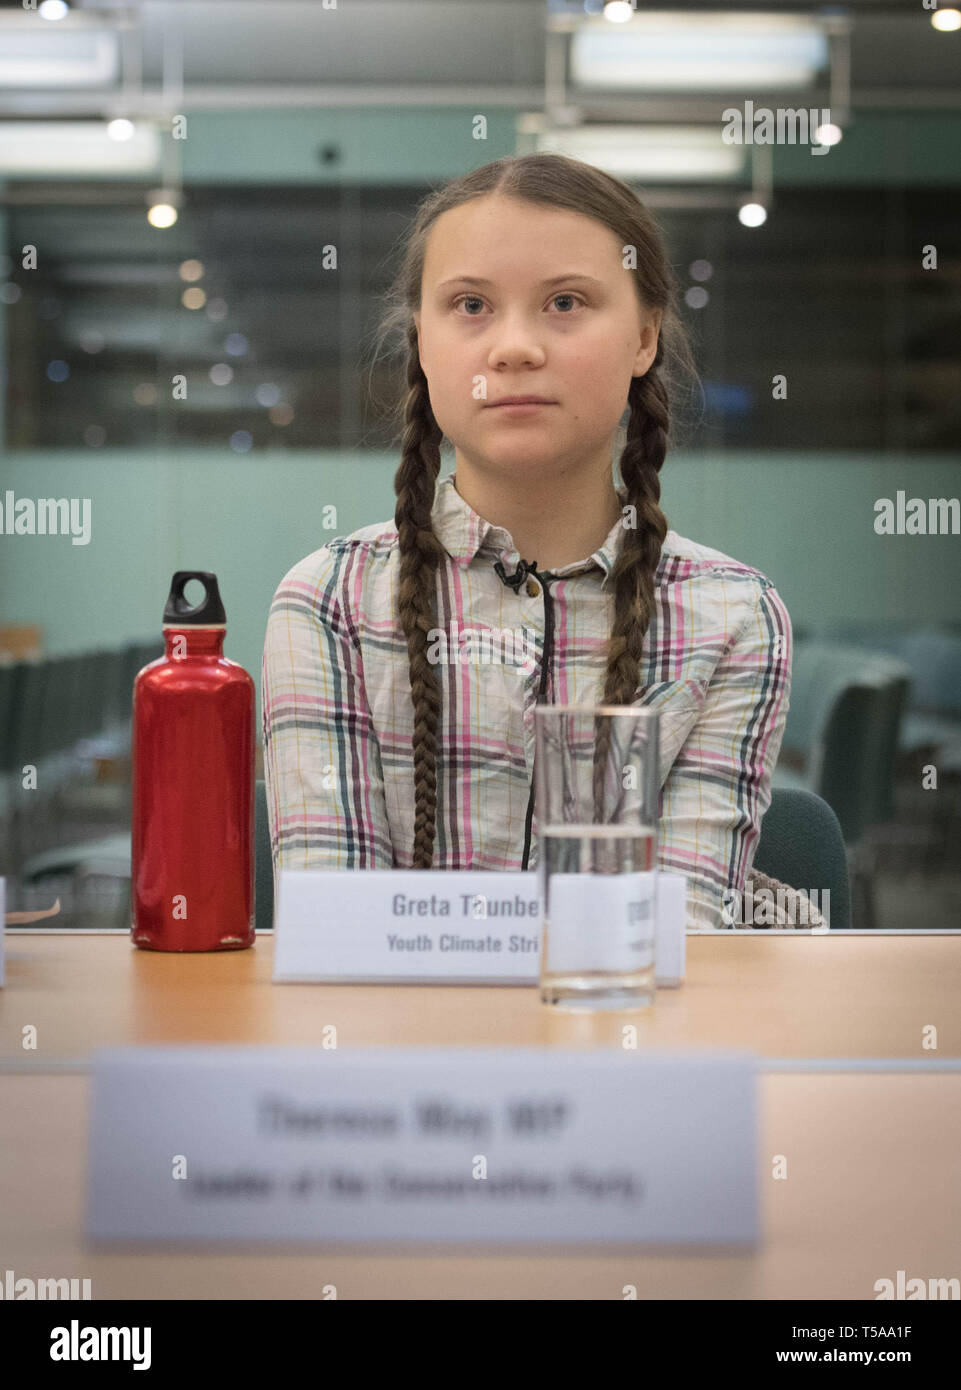 Swedish climate acticist Greta Thunberg meets leaders of the UK political parties at the House of Commons in Westminster, London to discuss the need for cross-party action to address the climate crisis. Stock Photo